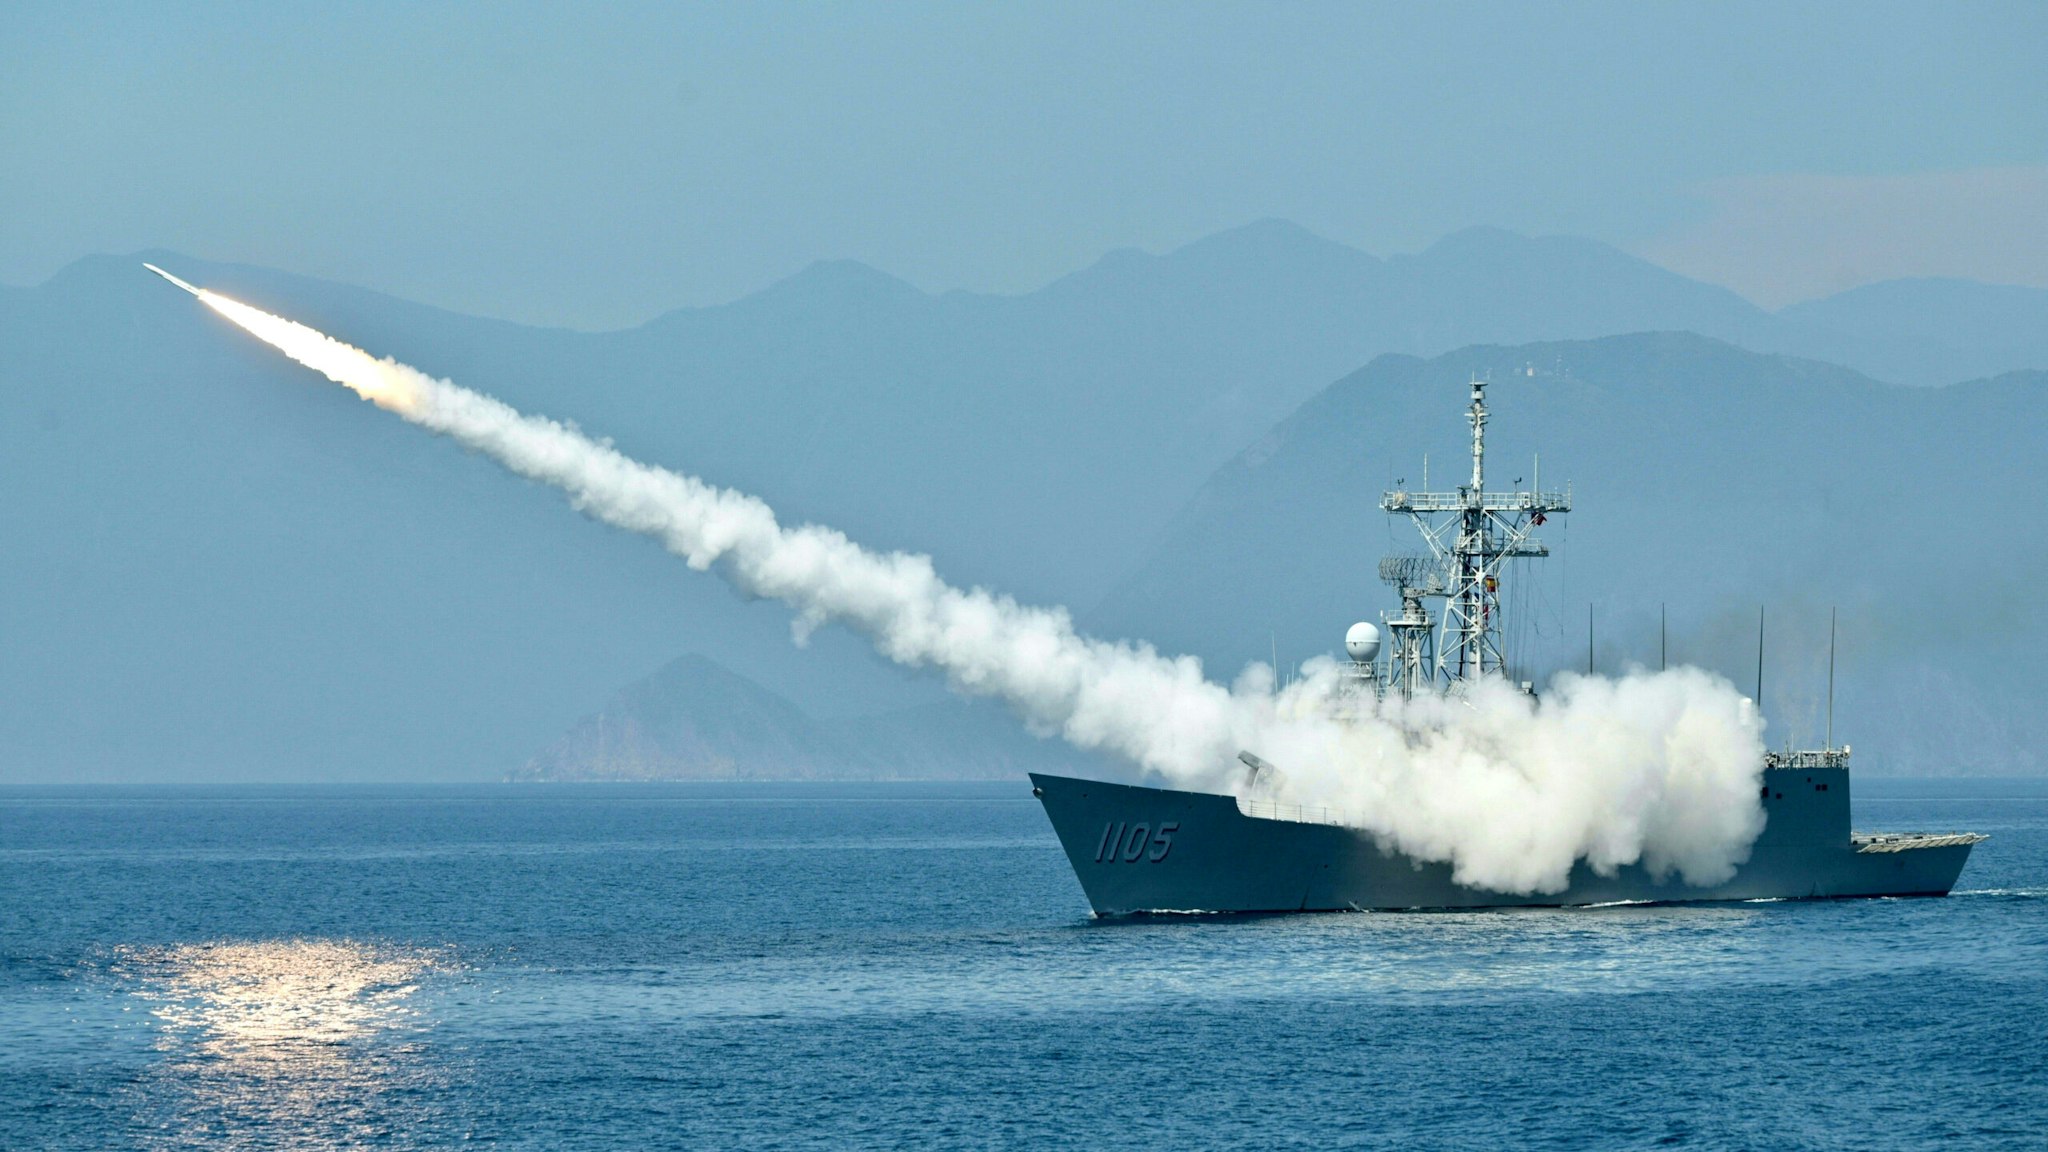 TOPSHOT - Taiwanese navy launches a US-made Standard missile from a frigate during the annual Han Kuang Drill, on the sea near the Suao navy harbor in Yilan county on July 26, 2022.